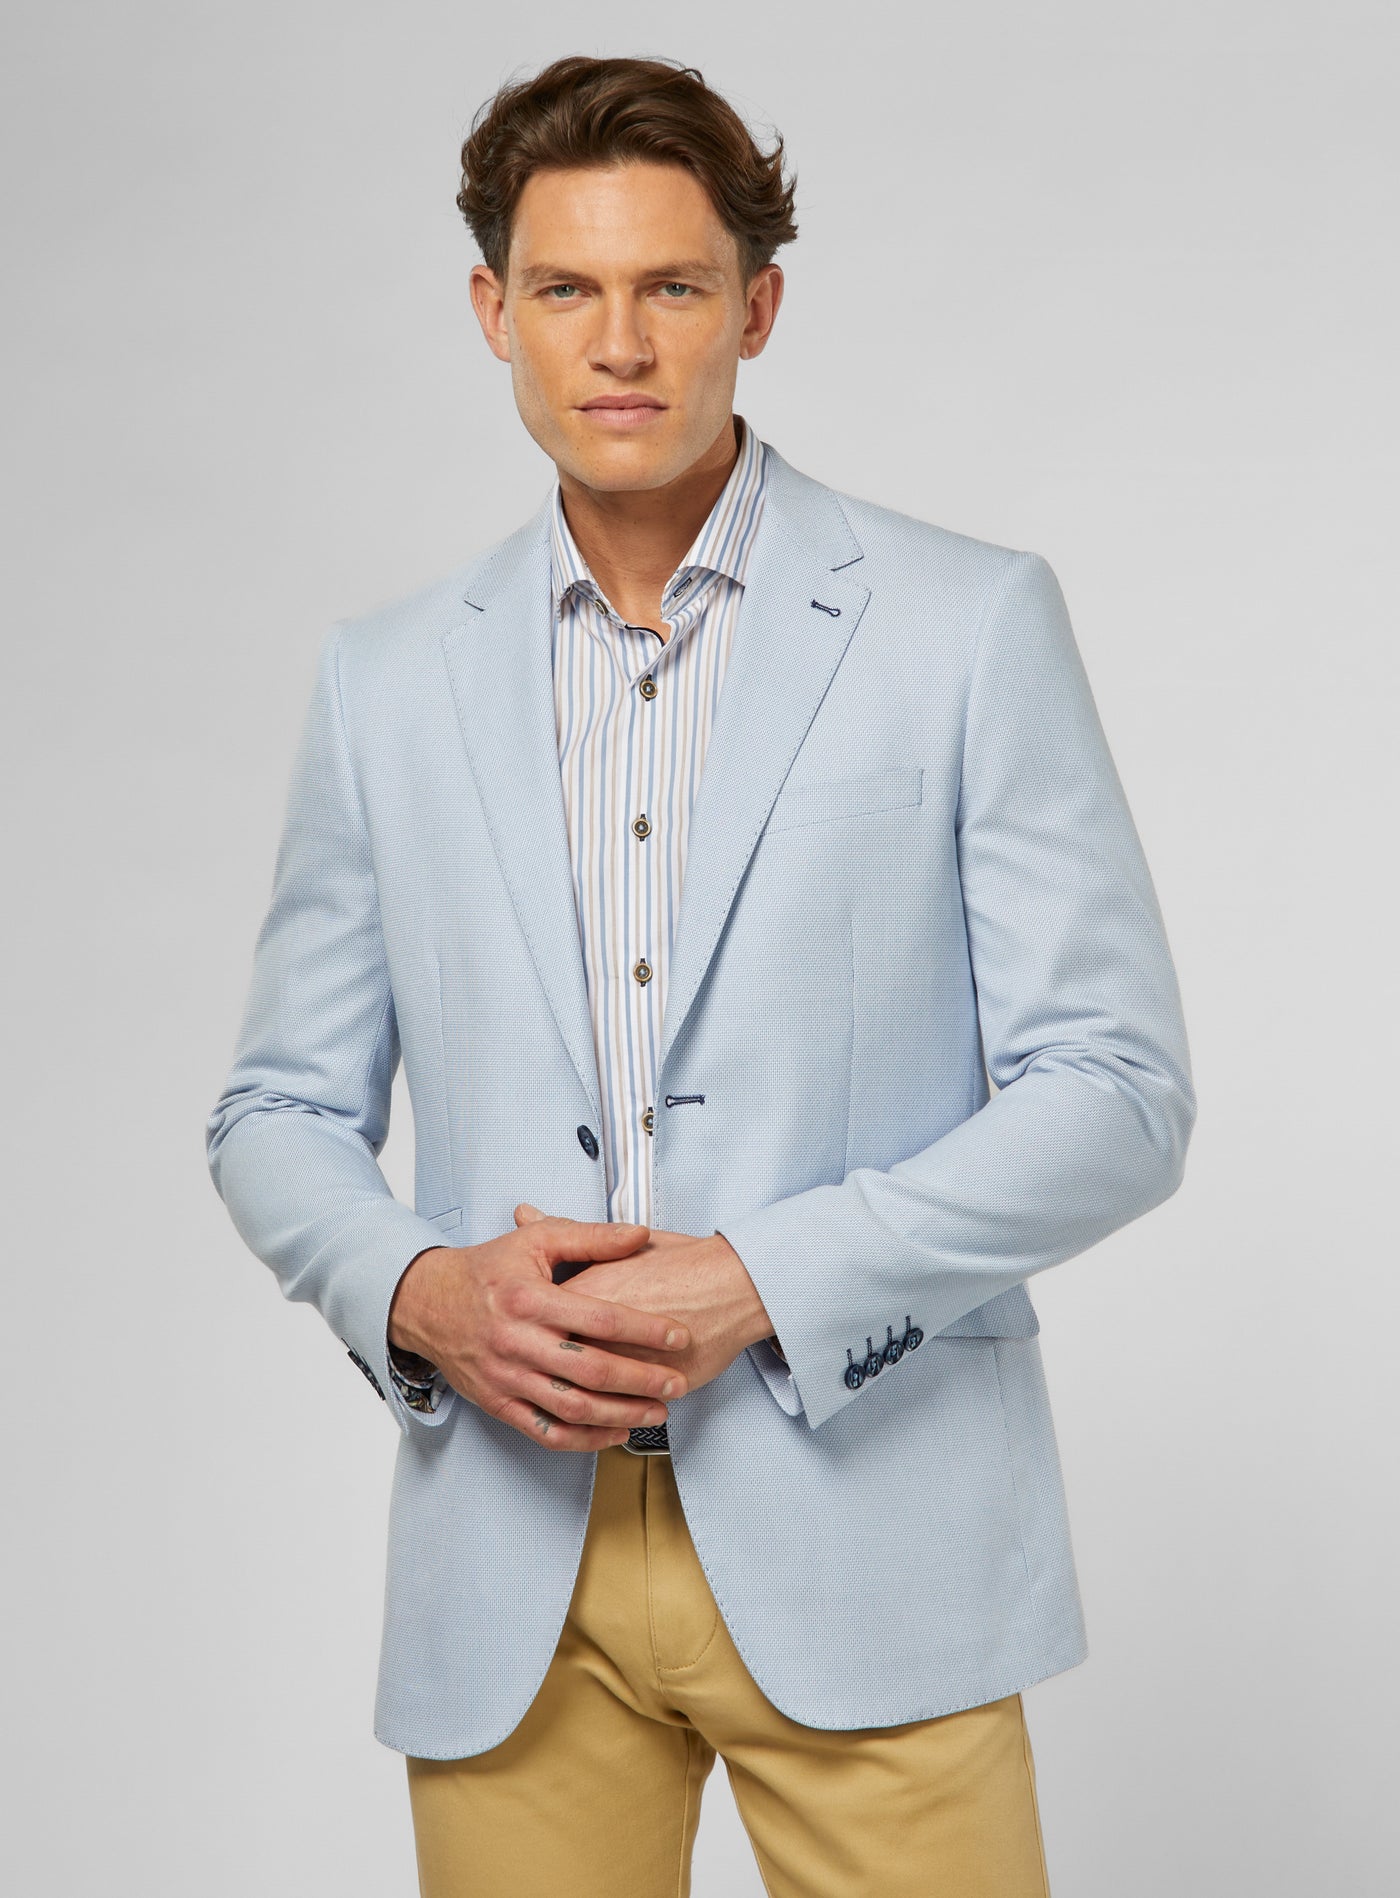 Men's Casual and Sport Jackets - Ernest